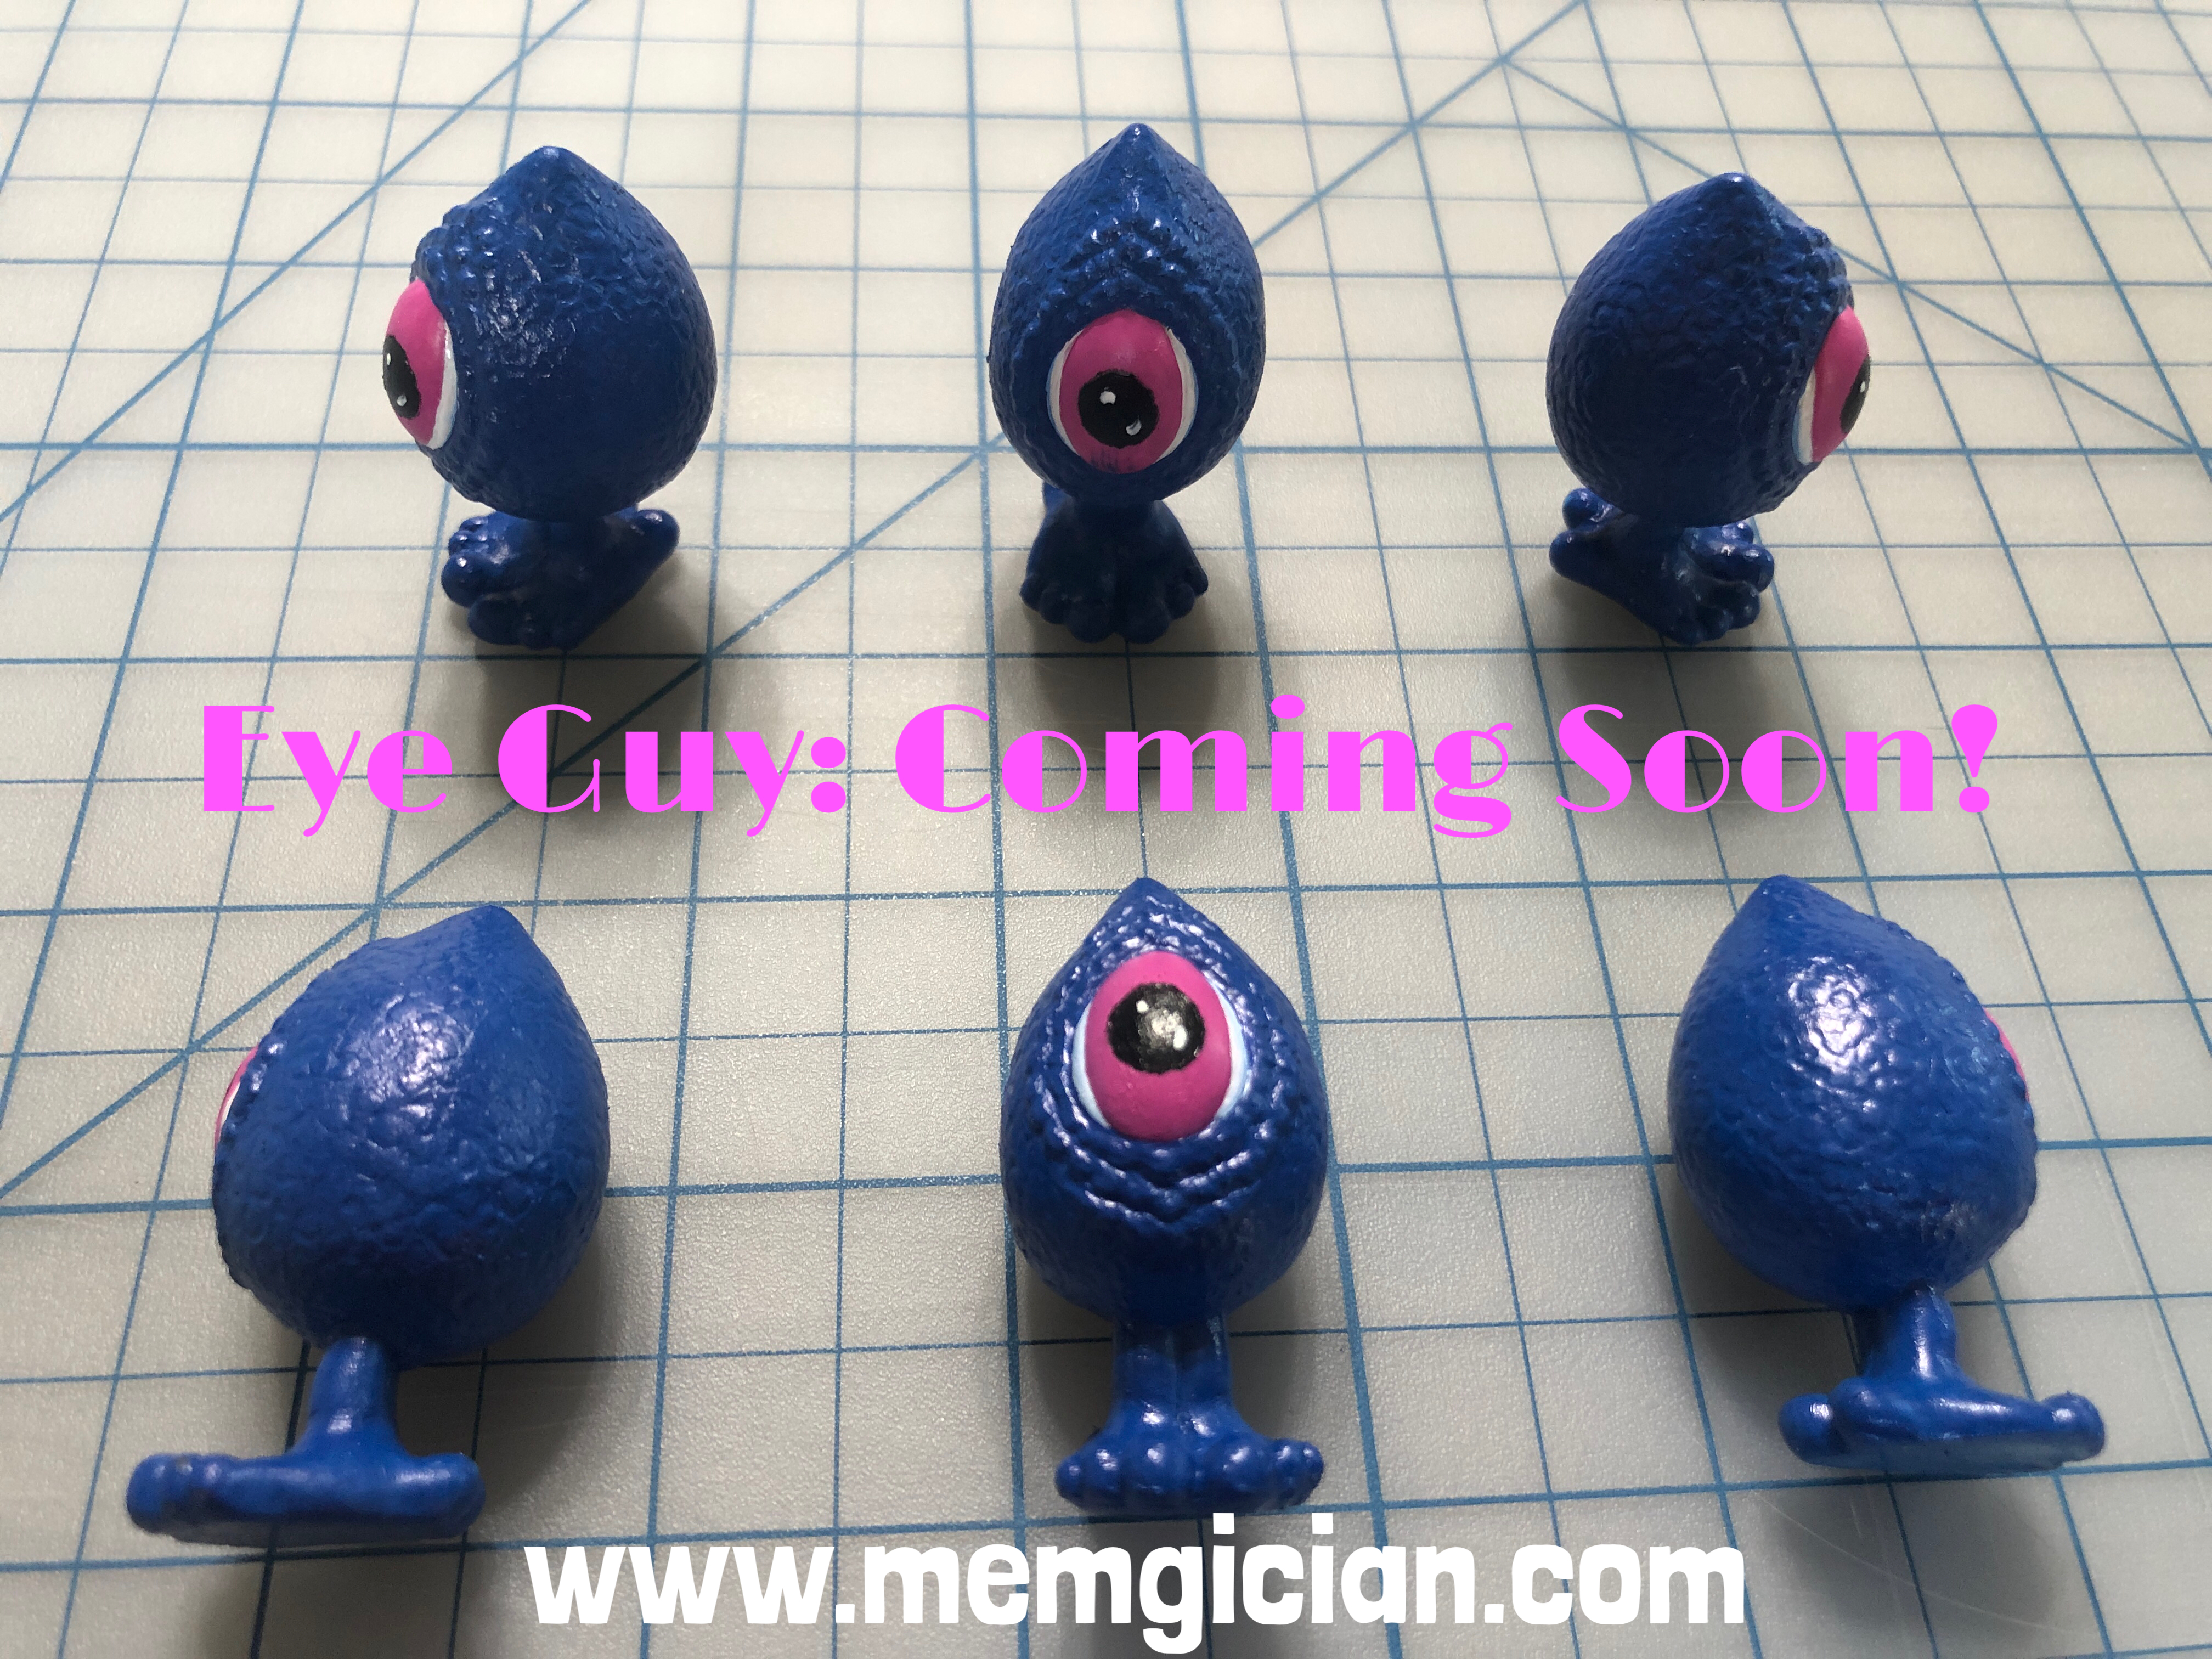 Eye Guy 2 inch mini resin capsule figure by MEF (Michael E. French : No Coast Art Wizard). Order today!